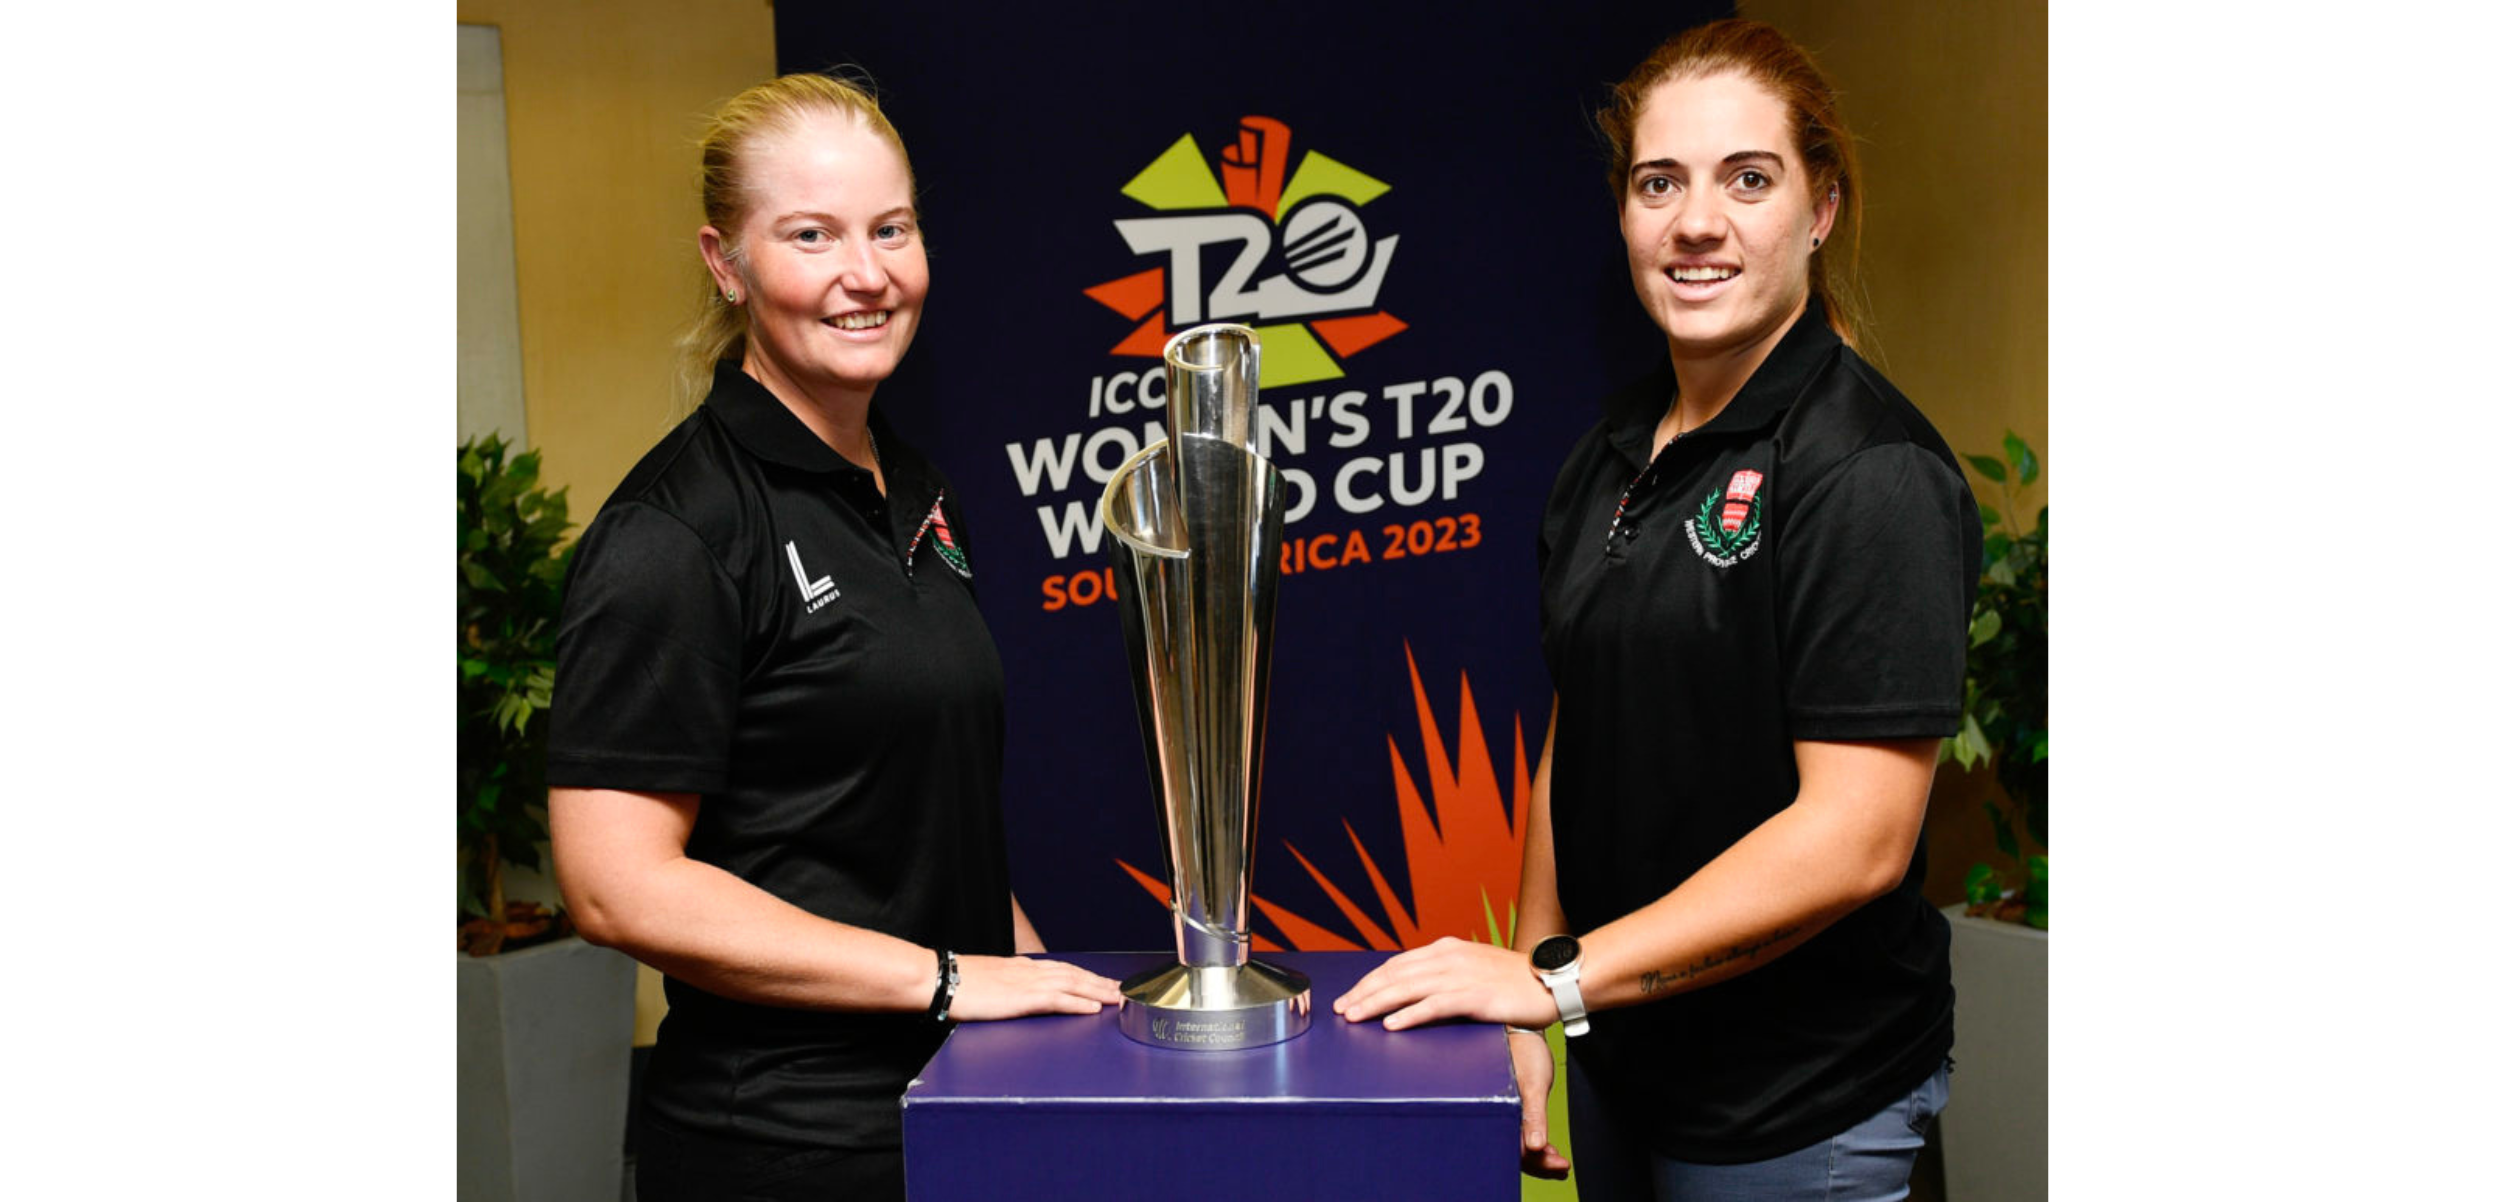 CSA: Home support will be Proteas’ 12th player in ICC Women’s T20 World Cup